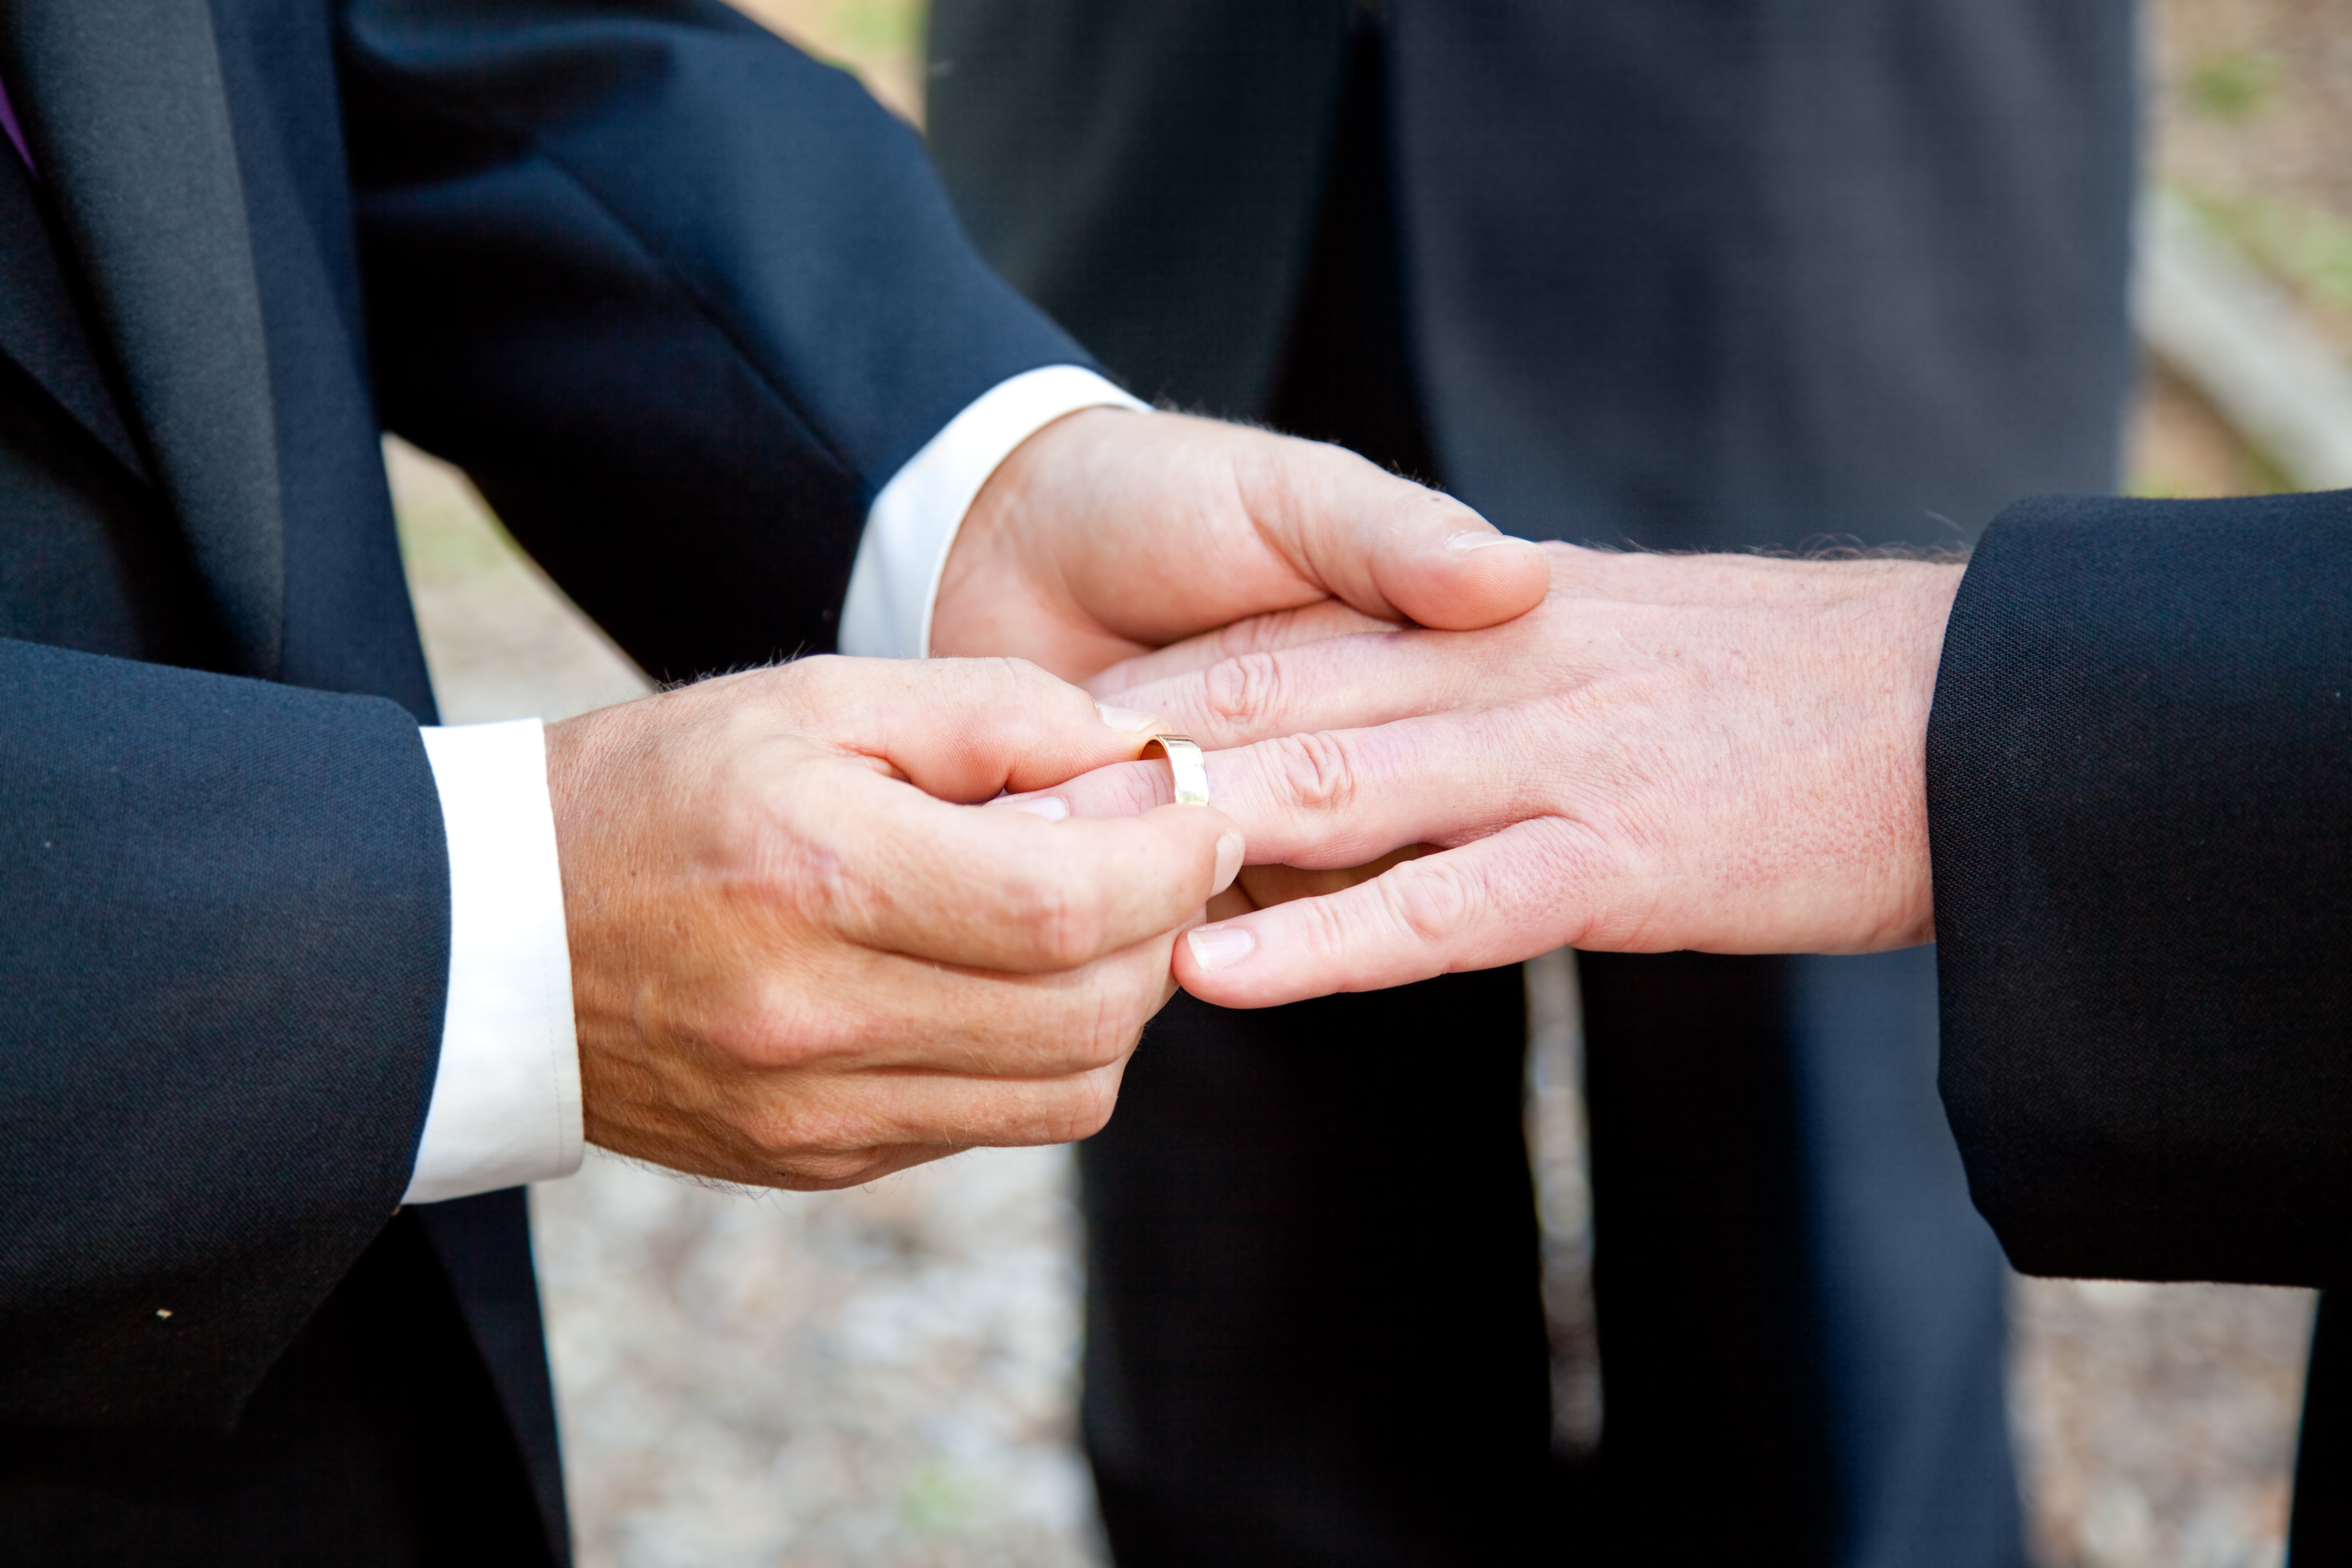 marriage matters a lot more to gay couples than straight ones